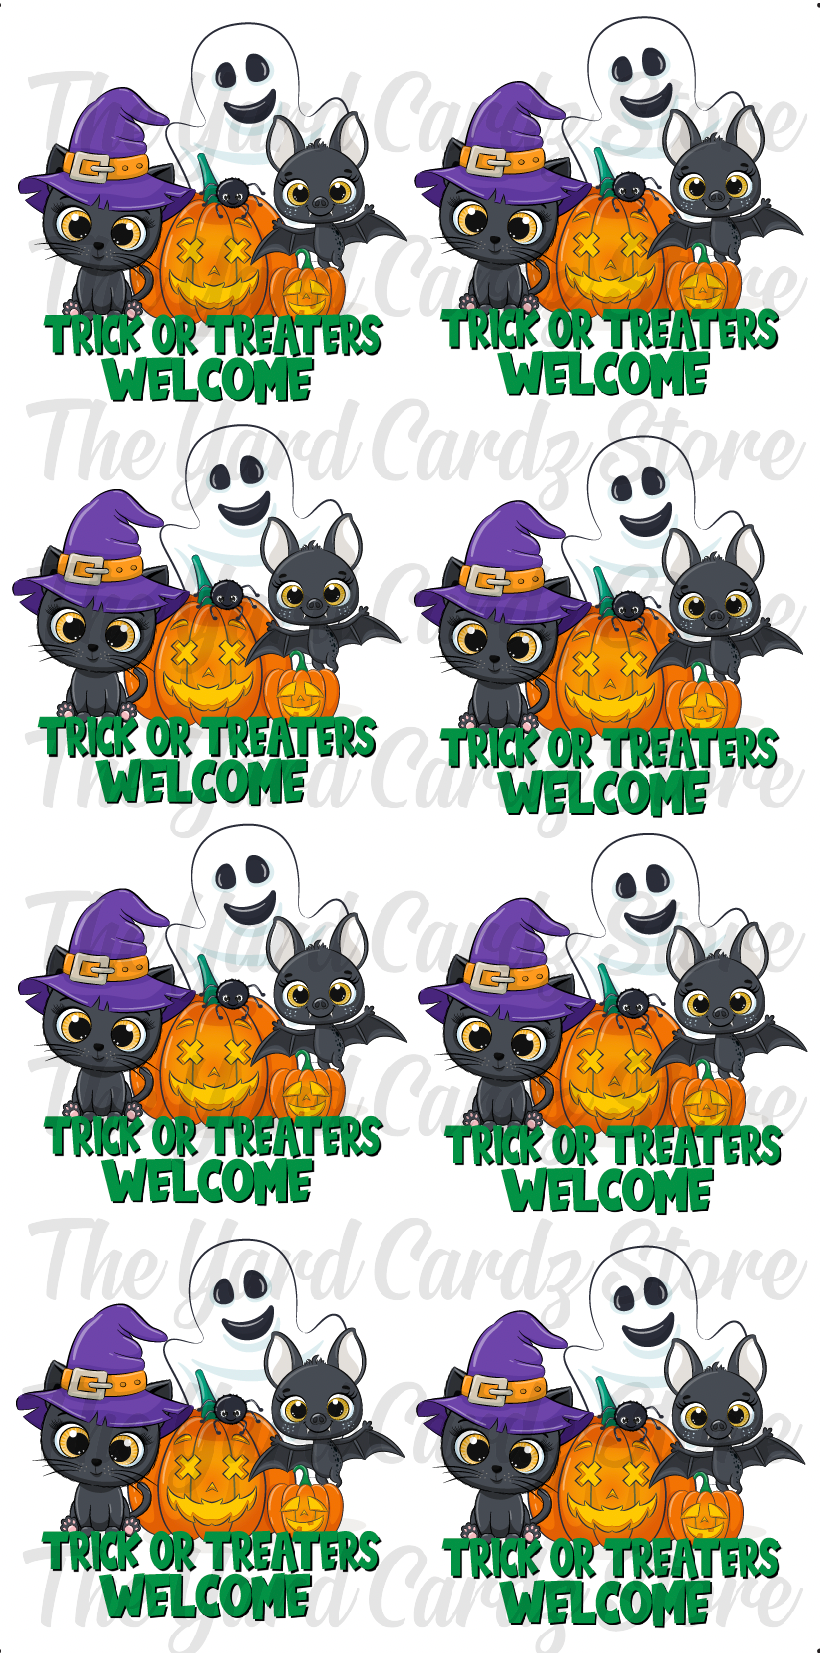 TRICK OR TREATERS WELCOME